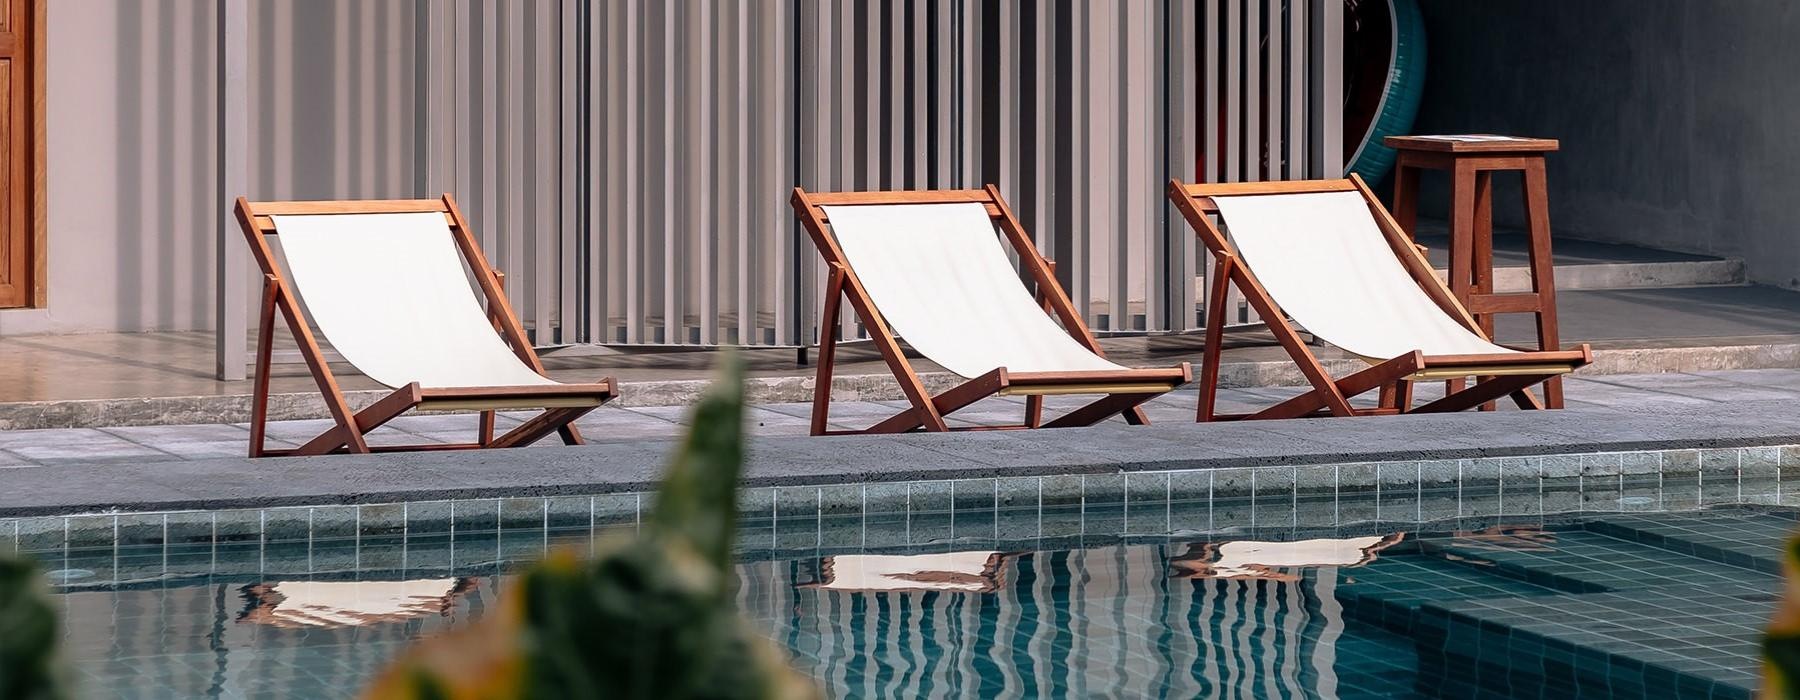 Chairs on a pool deck